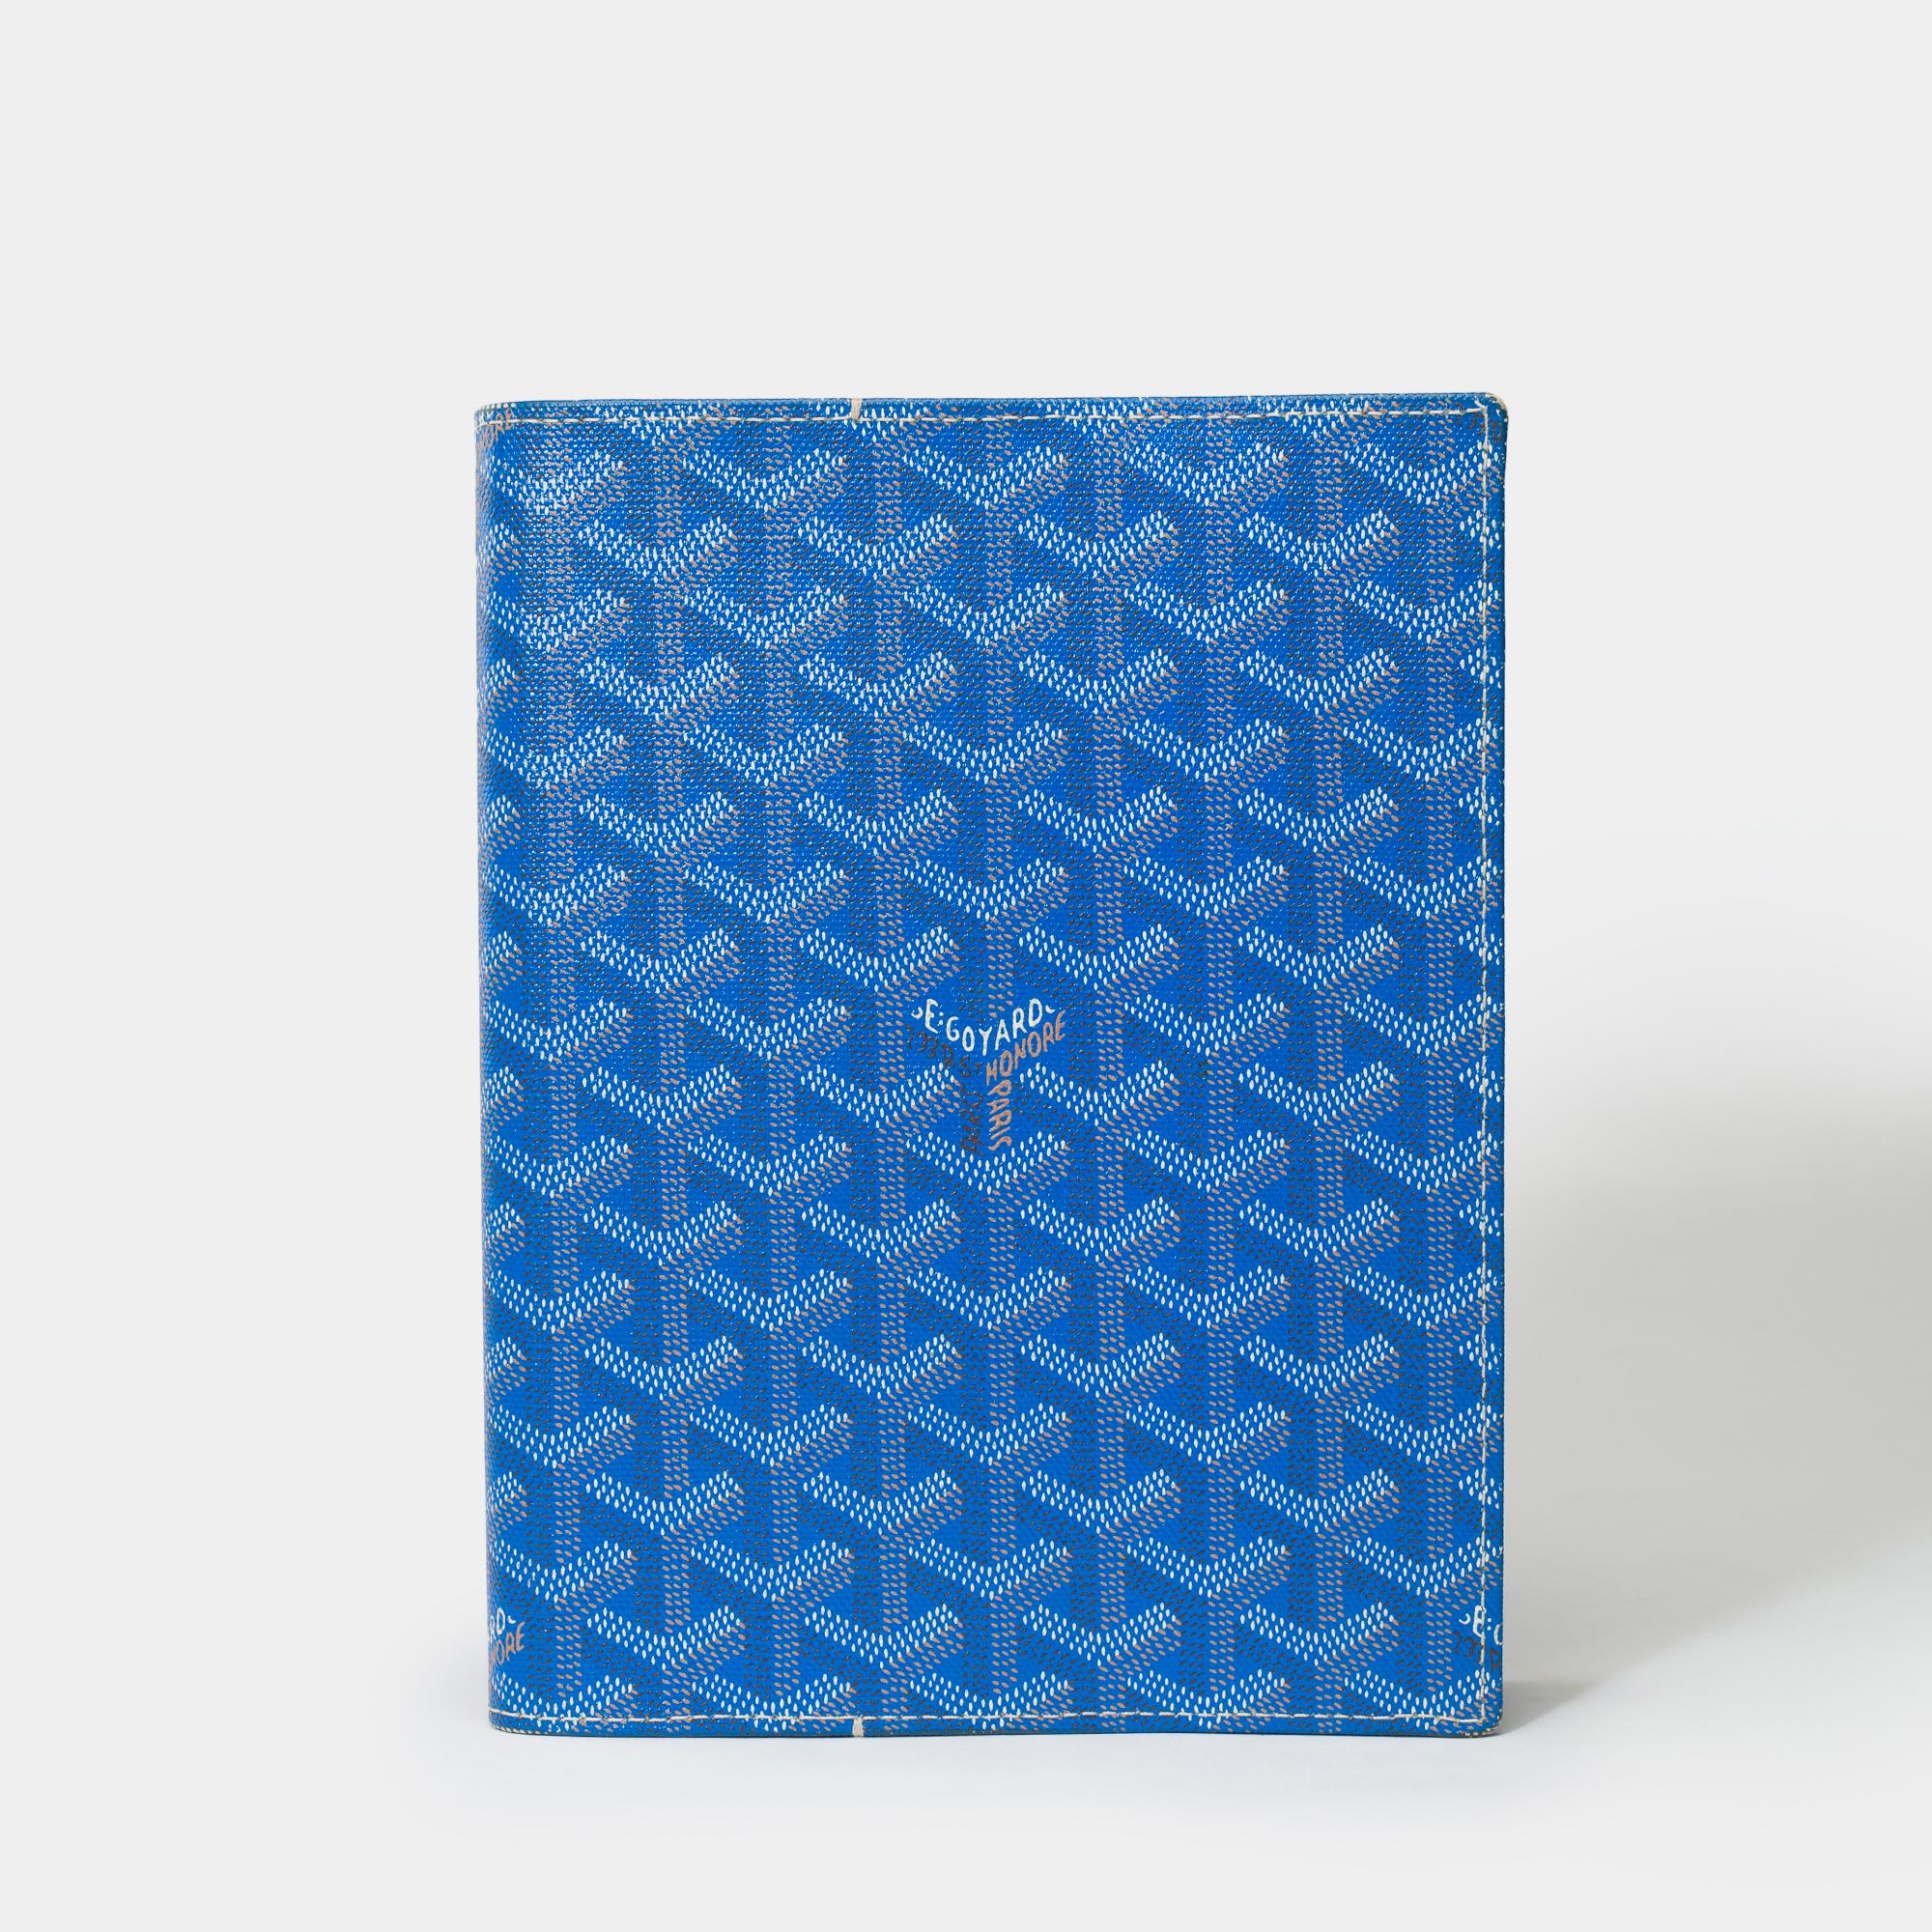 Gorgeous ​Goyard​ ​Castiglione​ Agenda​ ​Cover​ in ​blue​ ​Goyardine​ ​canvas
It​ ​can​ ​be​ ​used​ ​with​ ​different​ ​refills:​ ​refill​ ​agenda,​ ​reissued​ ​each​ ​year,​ ​to​ ​keep​ ​its​ ​schedule​ ​up​ ​to​ ​date,​ ​or​ ​refill​ ​notebook​